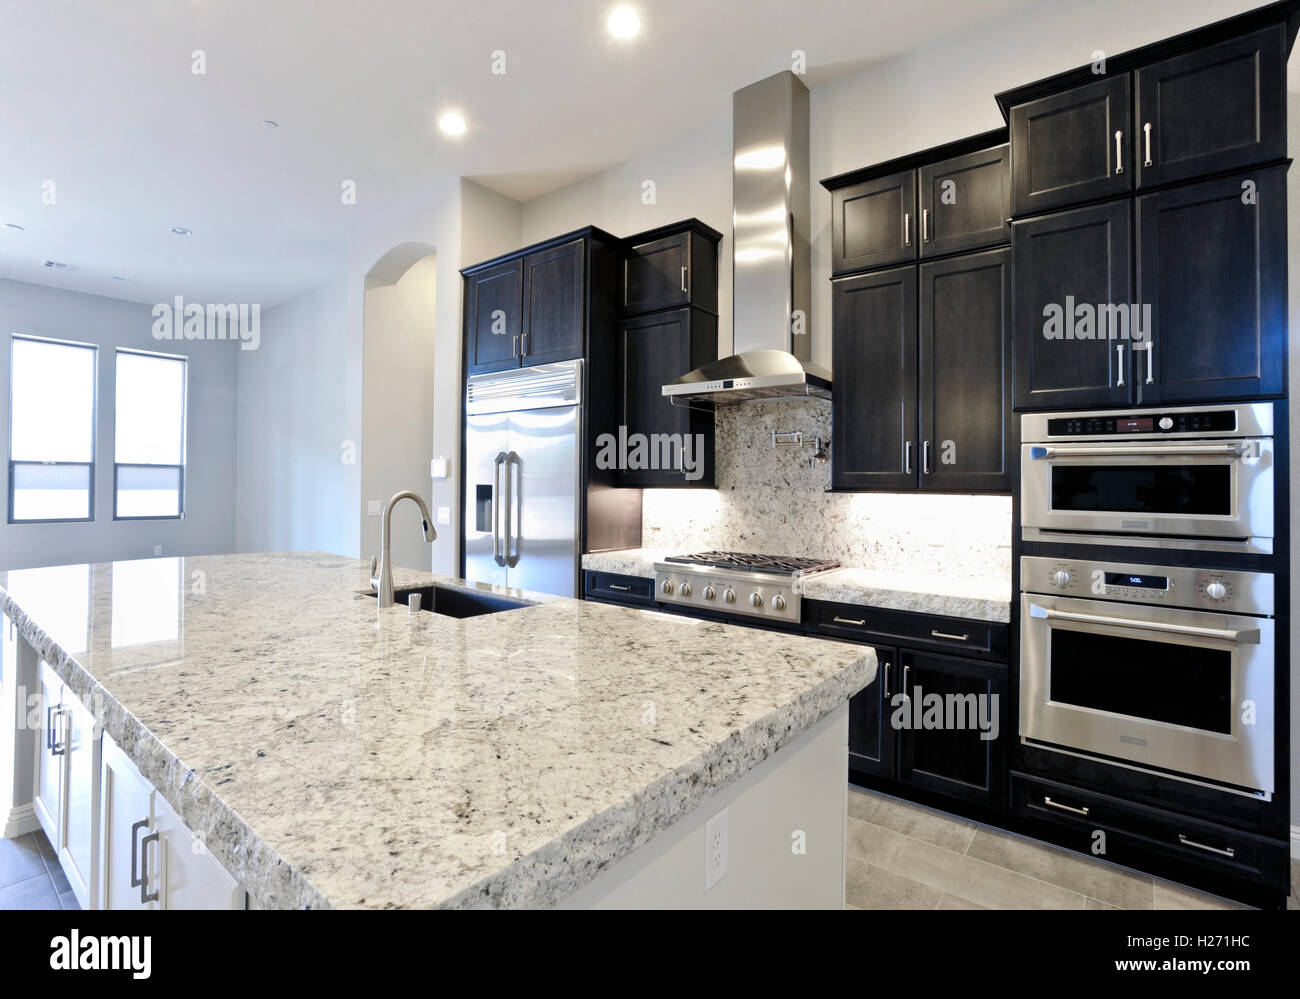 Residential contemporary kitchen Stock Photo